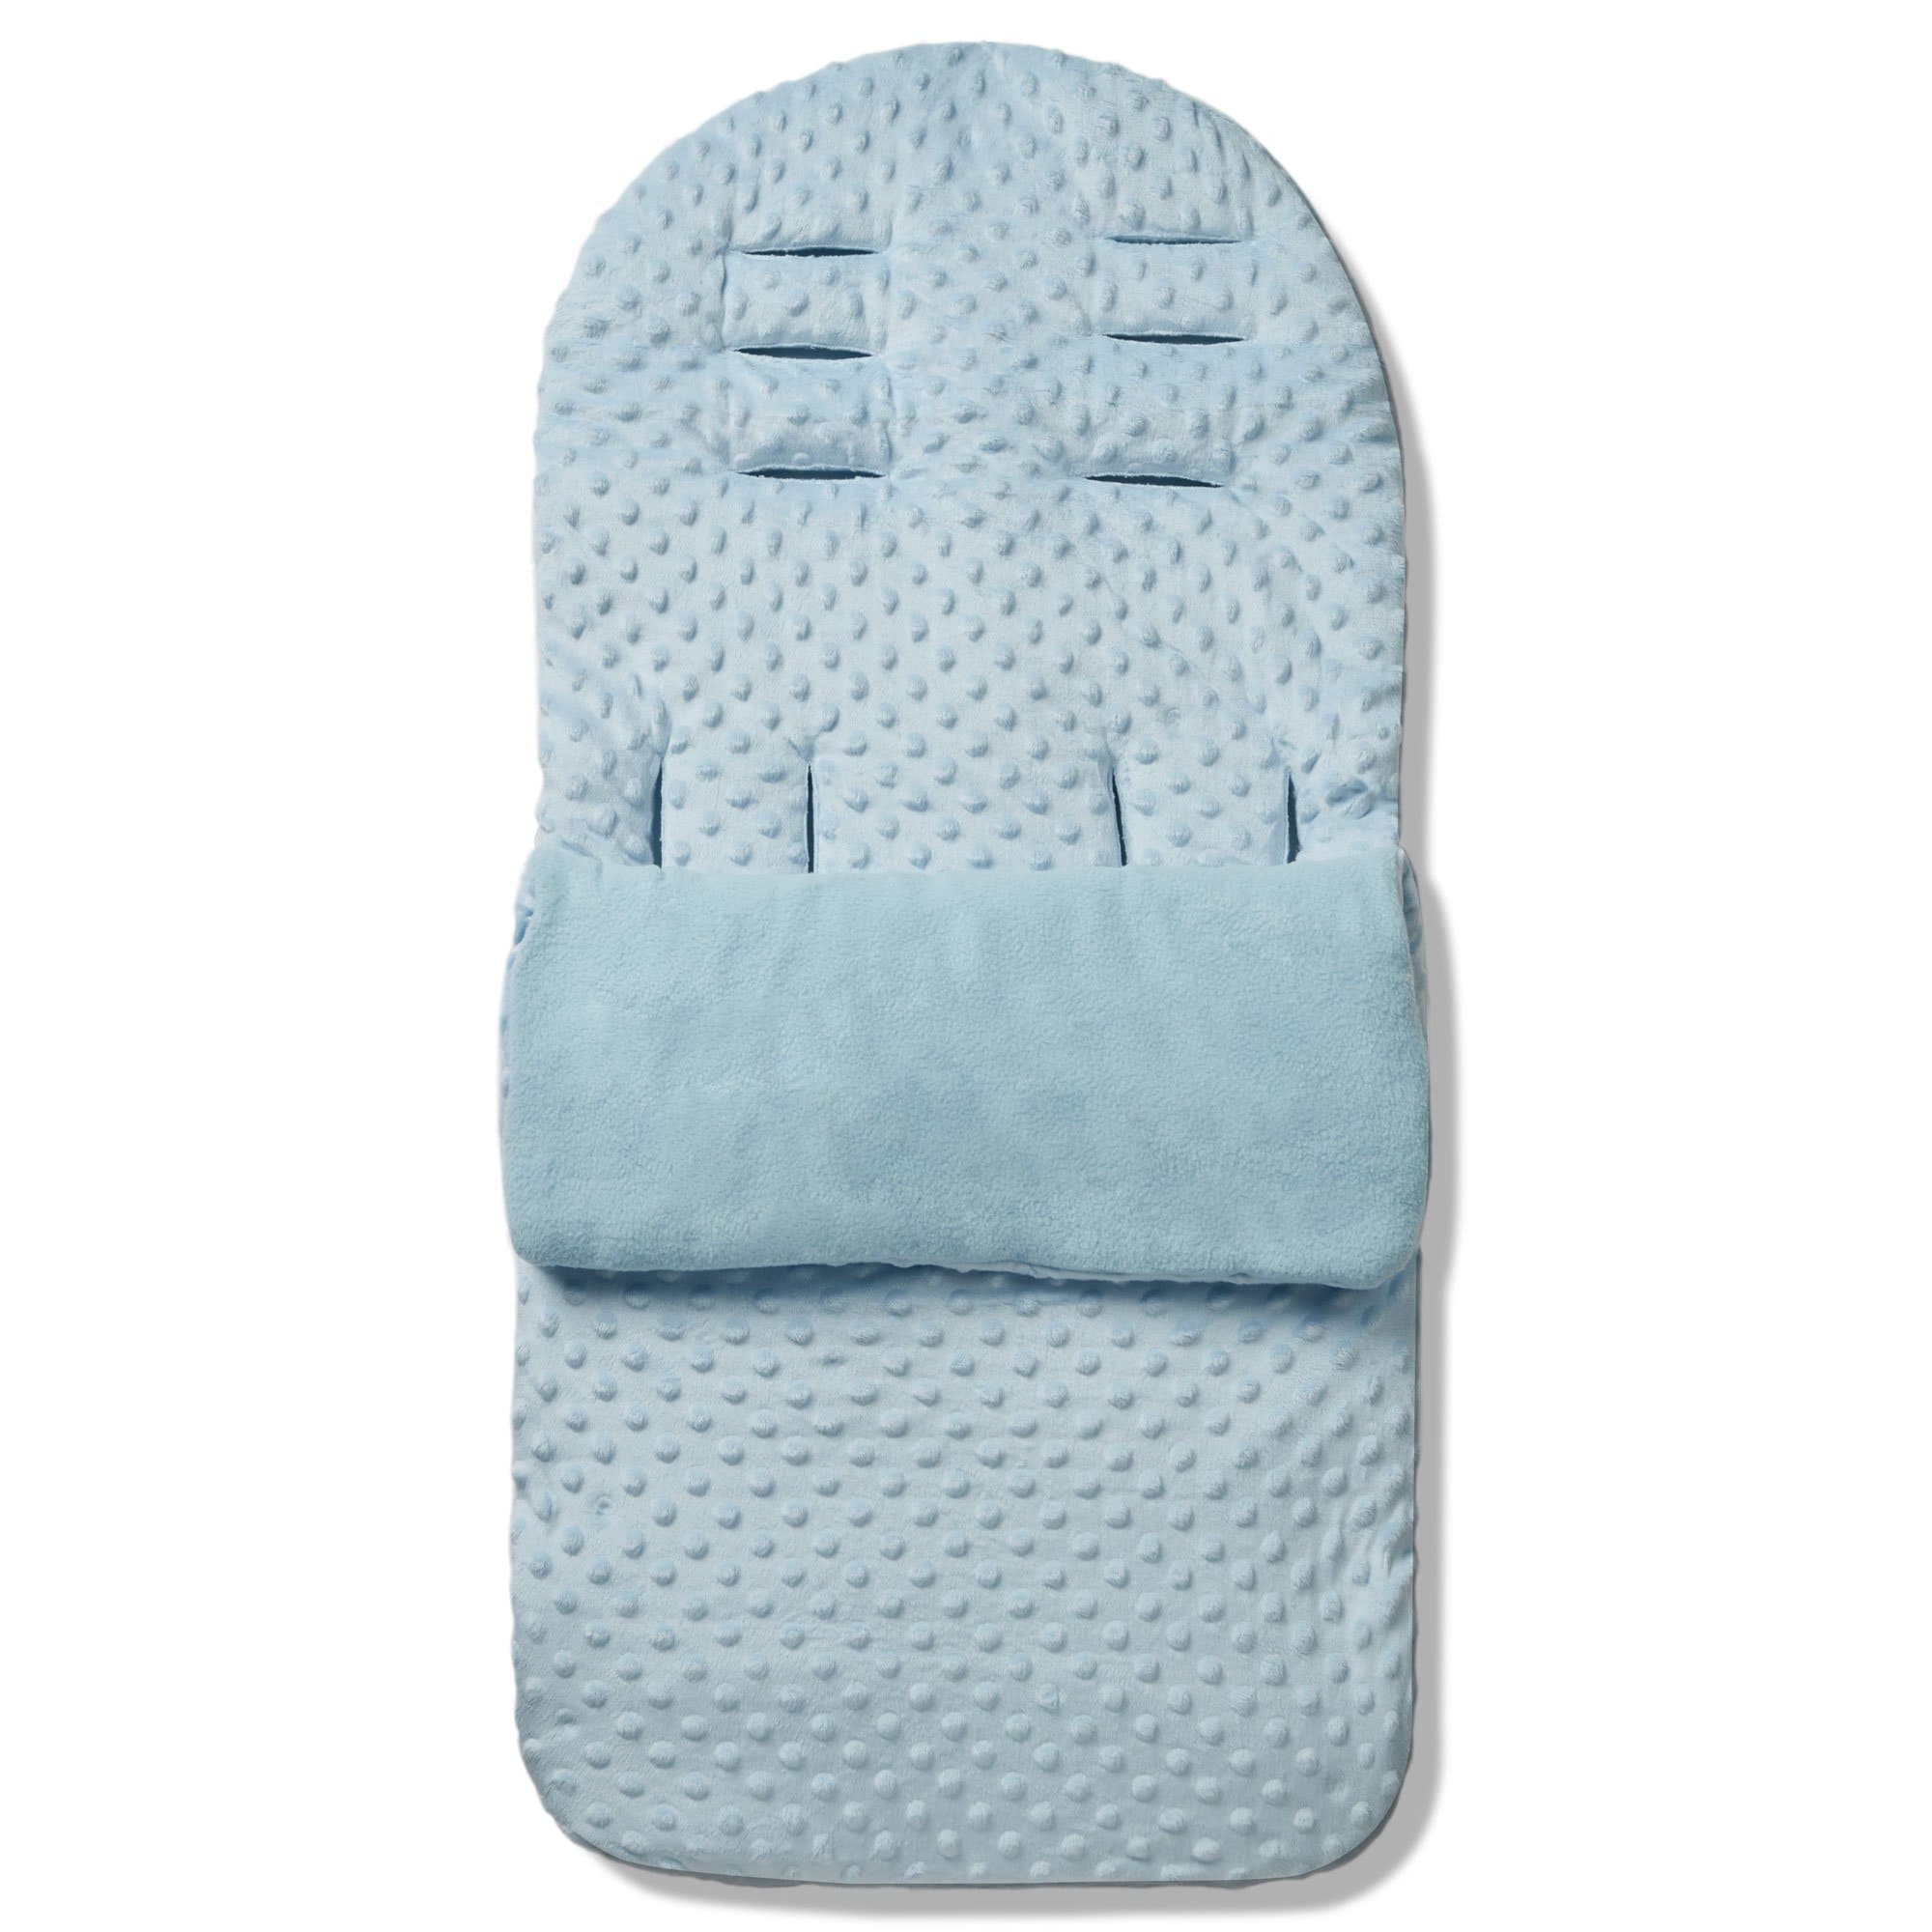 Dimple Footmuff / Cosy Toes Compatible with Concord - Blue / Fits All Models | For Your Little One